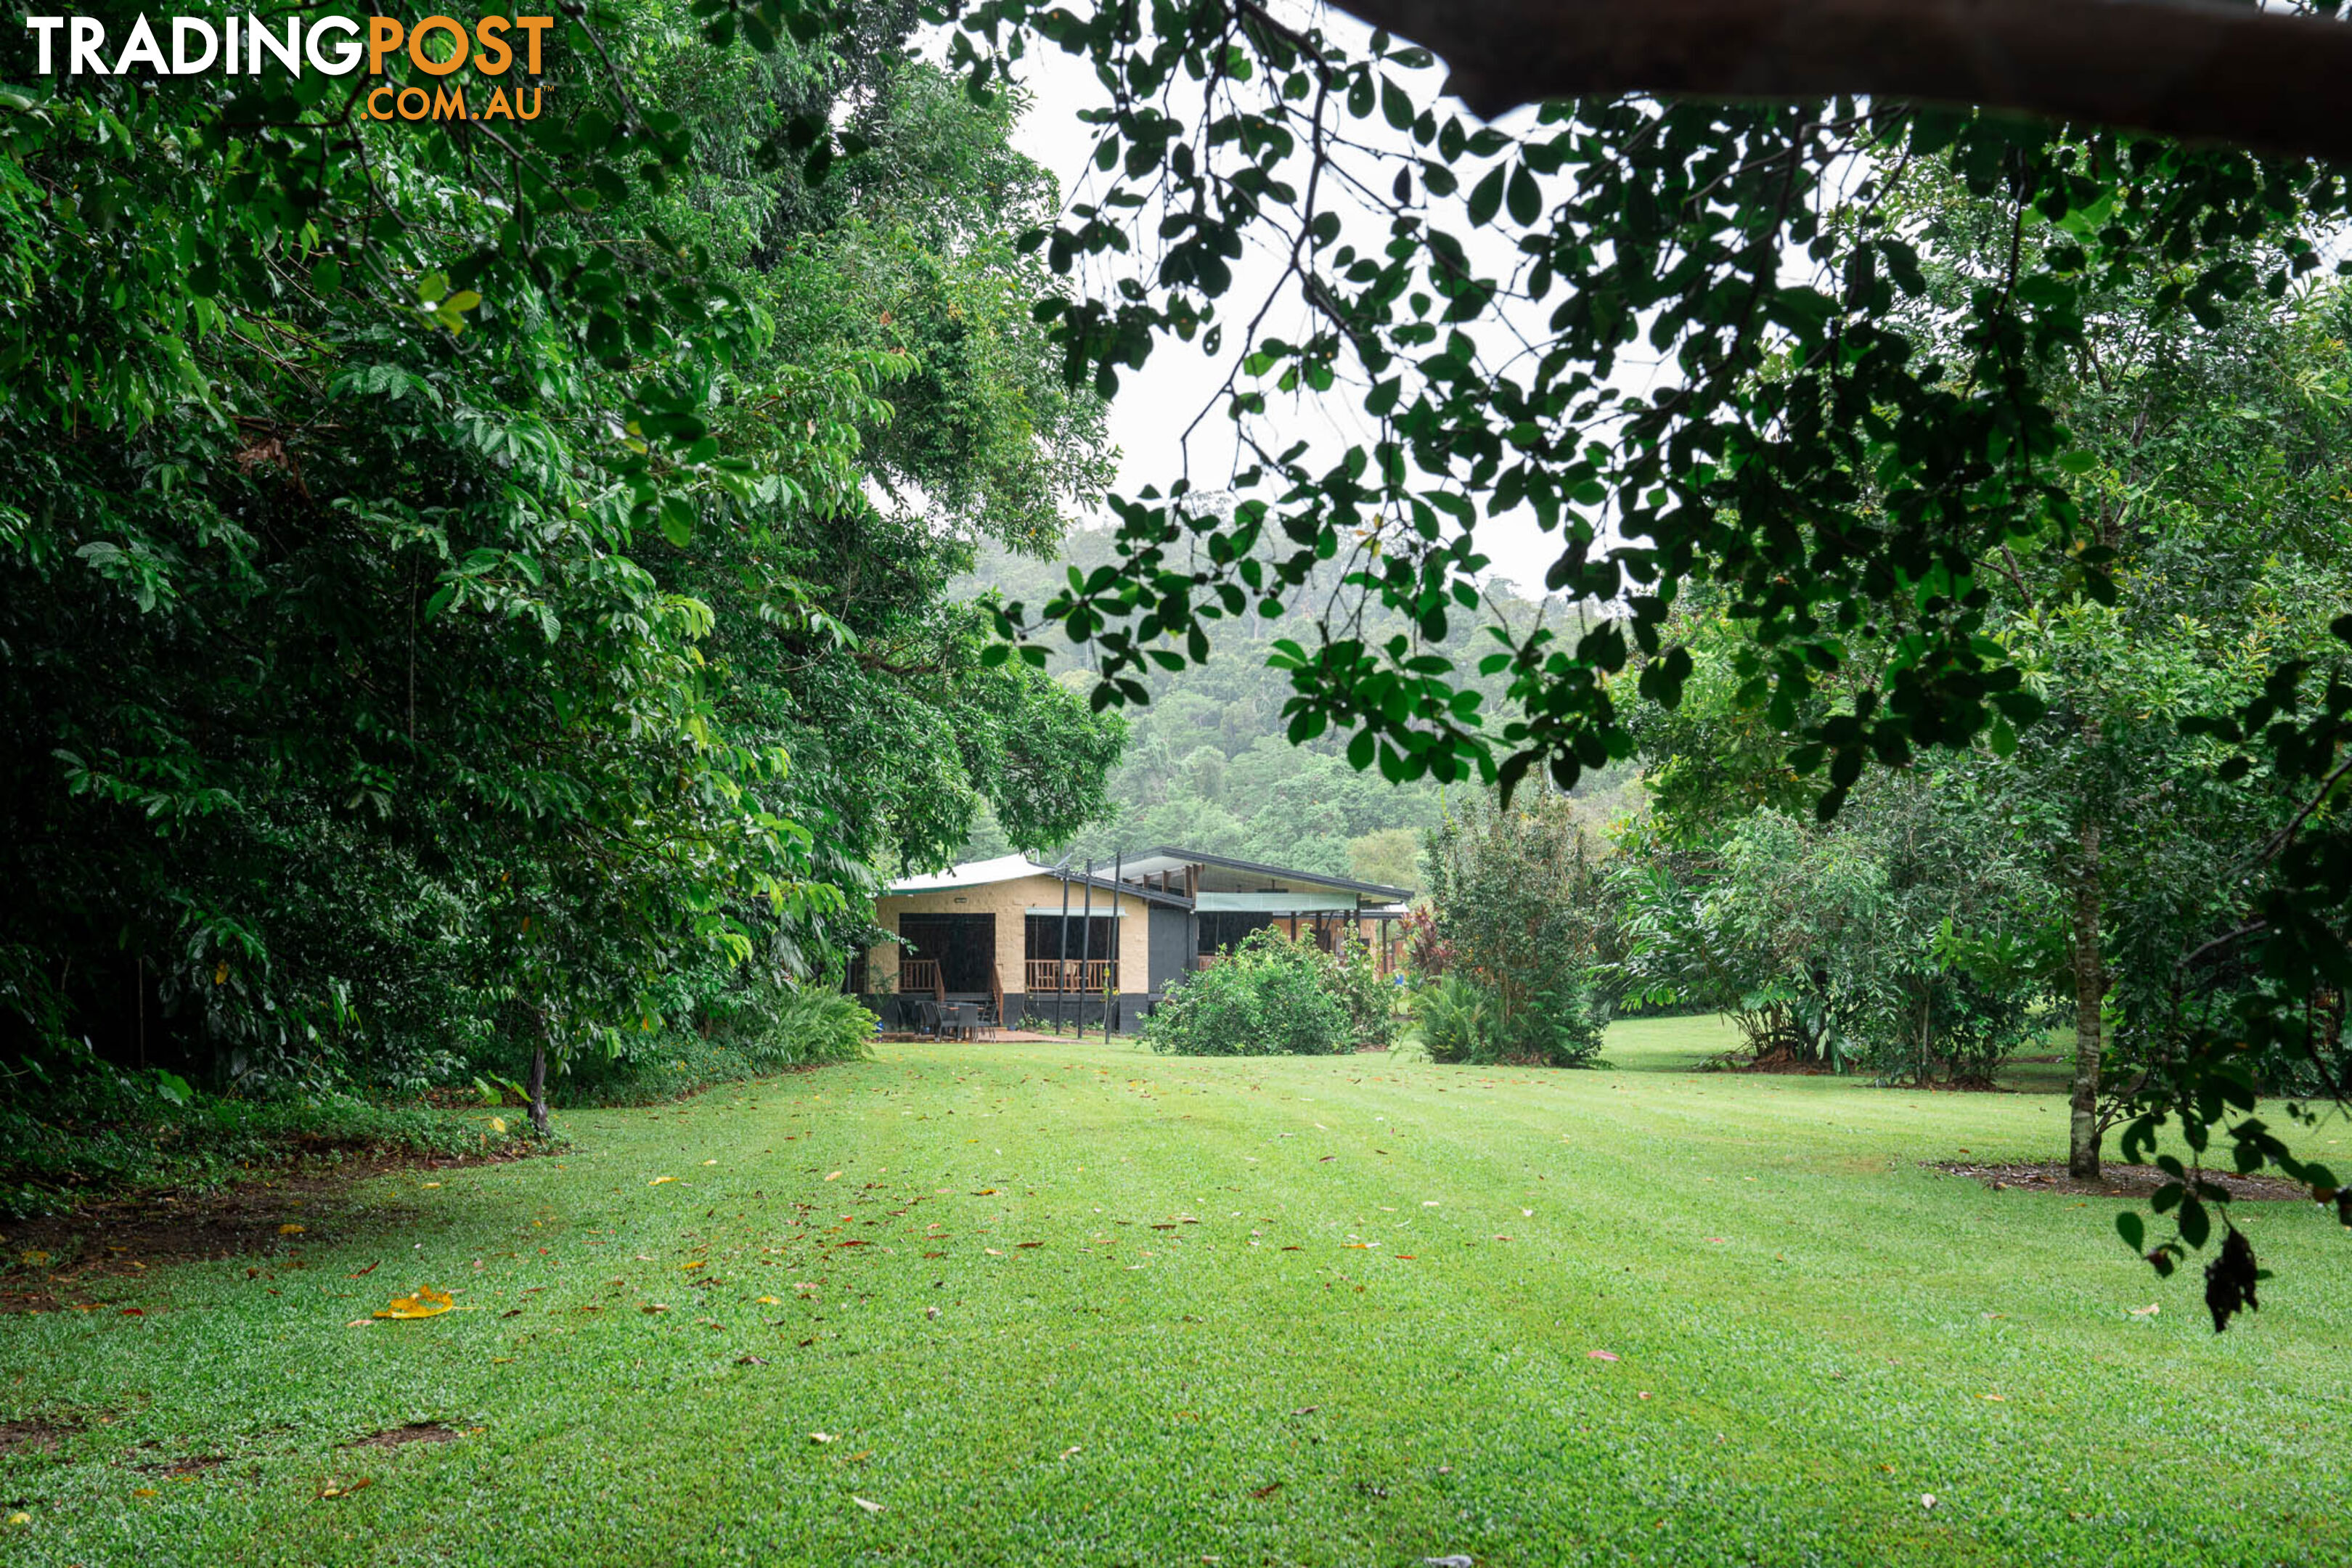 152 Old Forestry Road WHYANBEEL QLD 4873